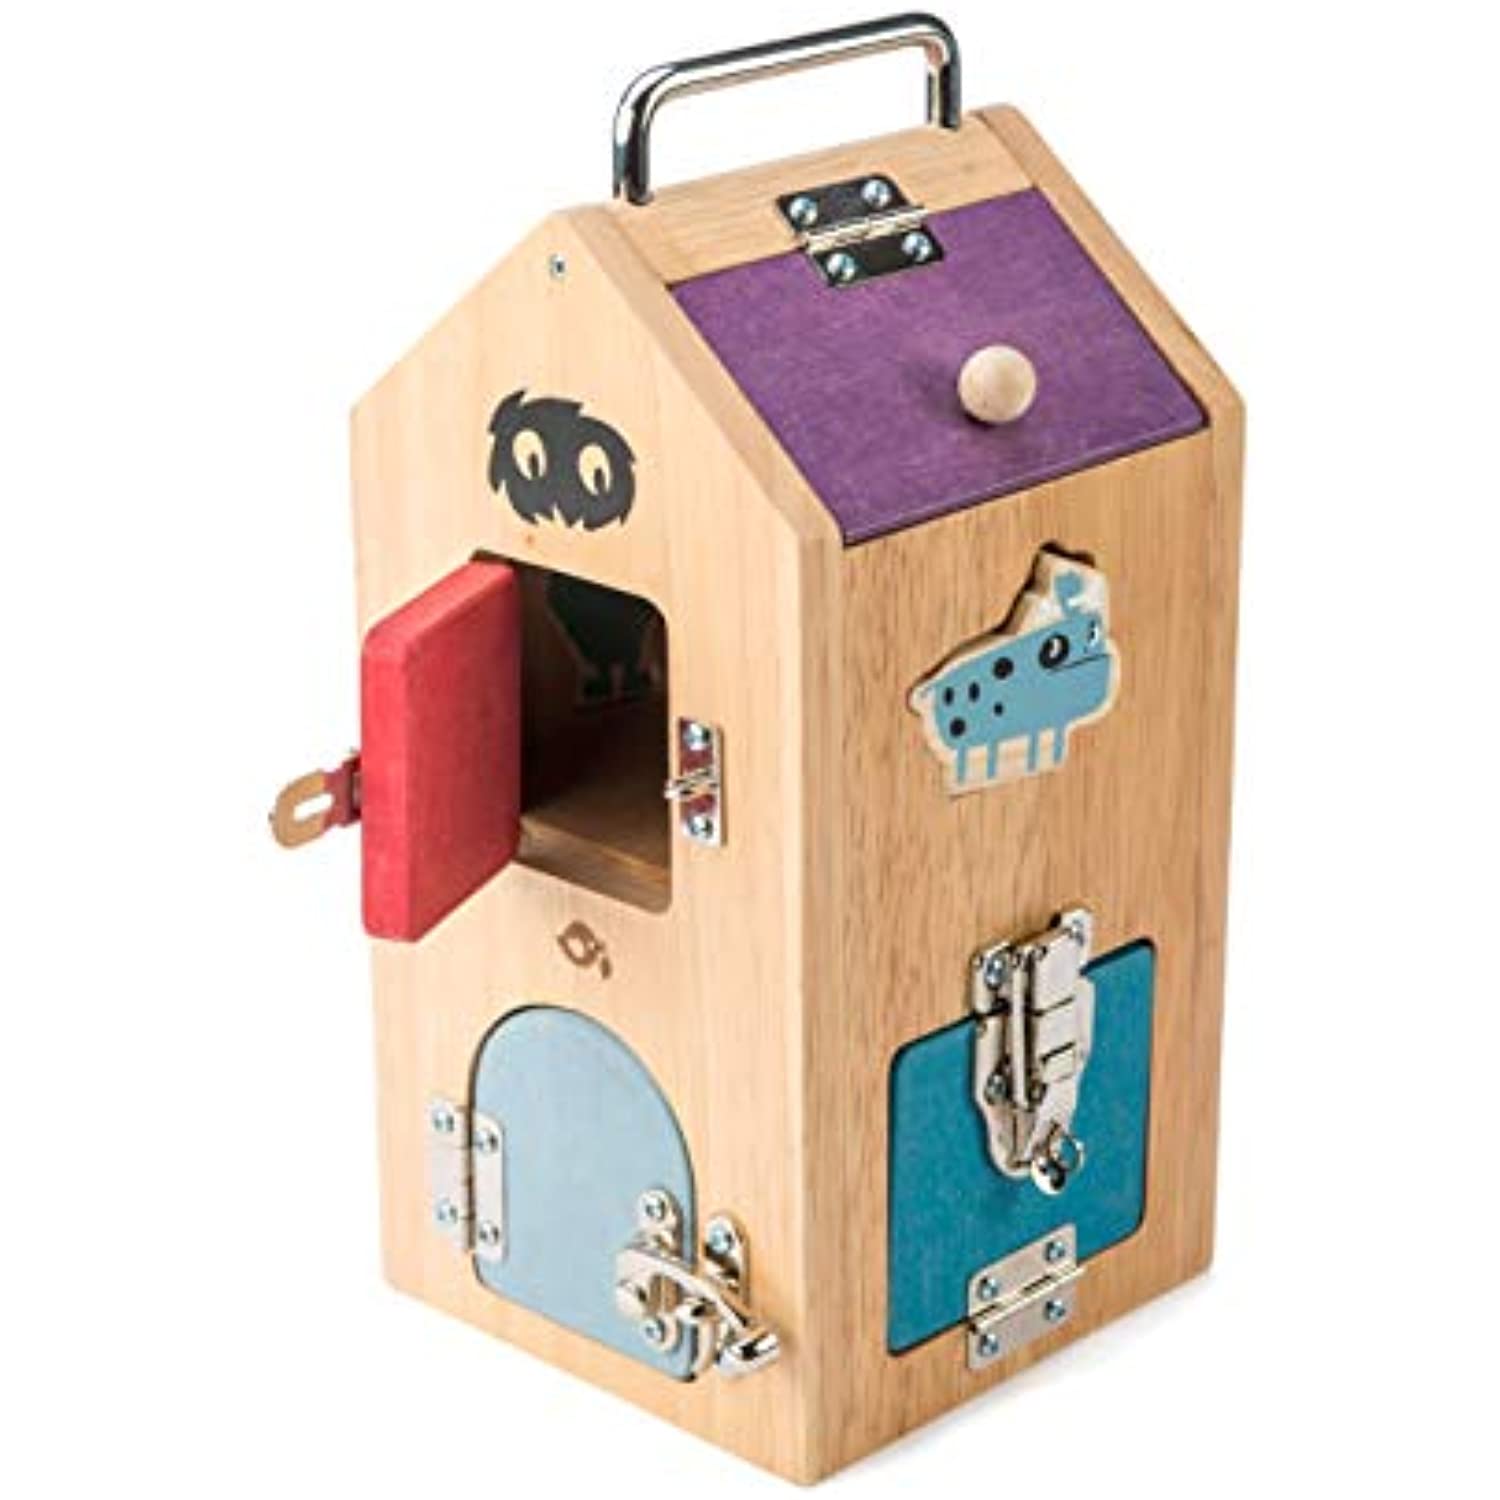 Tender Leaf Toys Wooden Monster Lock Box - 8 Different Doors with Various Lock Mechanisms Helps Develop Probelm Solving Skills - 3 +, Multicolor, 6.5" x 6.7" x 11.7" - image 2 of 6